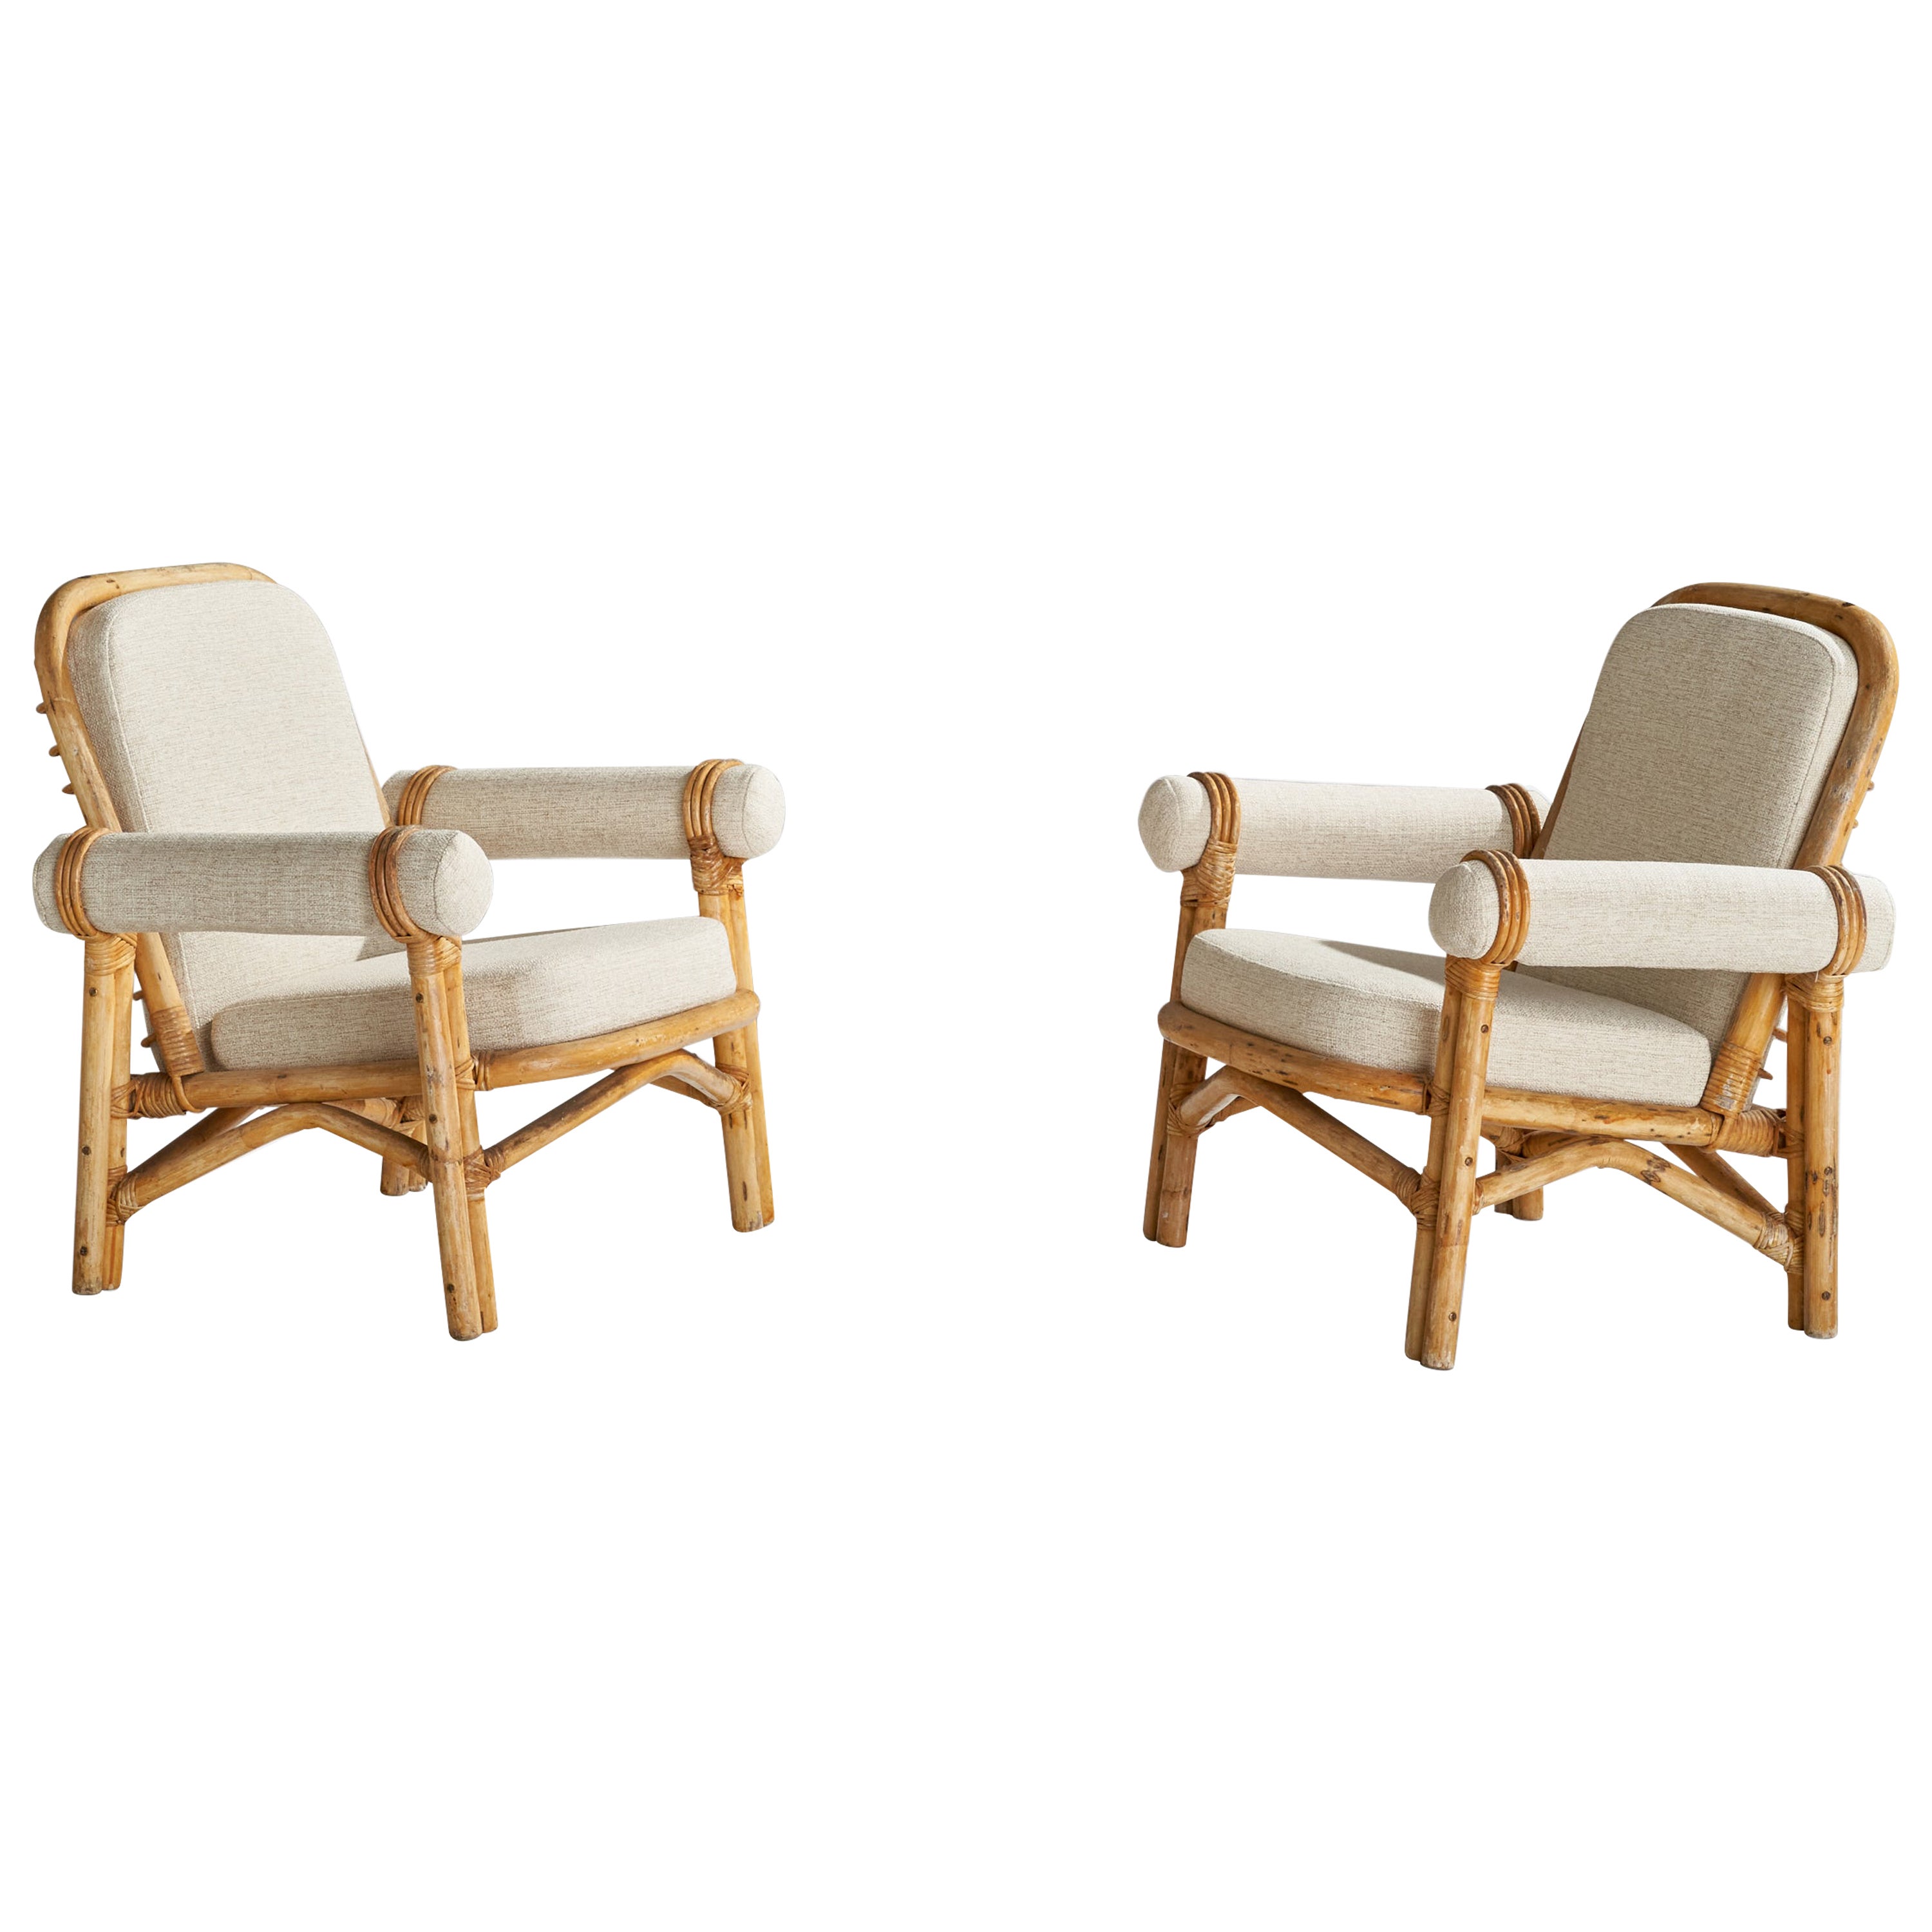 Swedish Designer, Lounge Chairs, Bamboo, Rattan, Fabric, Sweden, 1950s For Sale